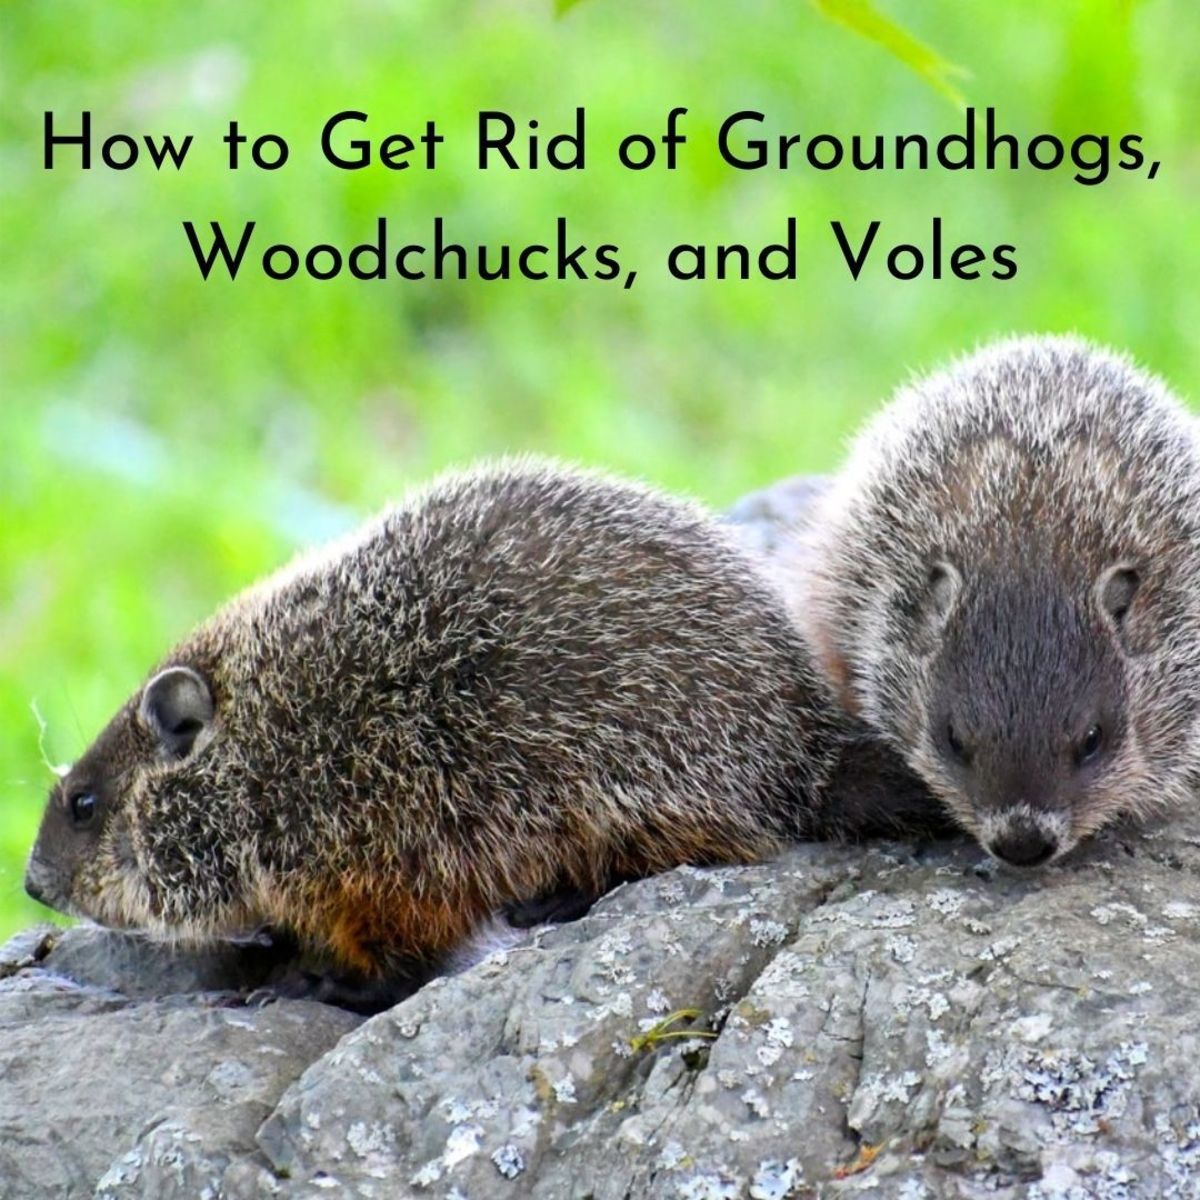 How to Get Rid of Groundhogs, Woodchucks and Voles